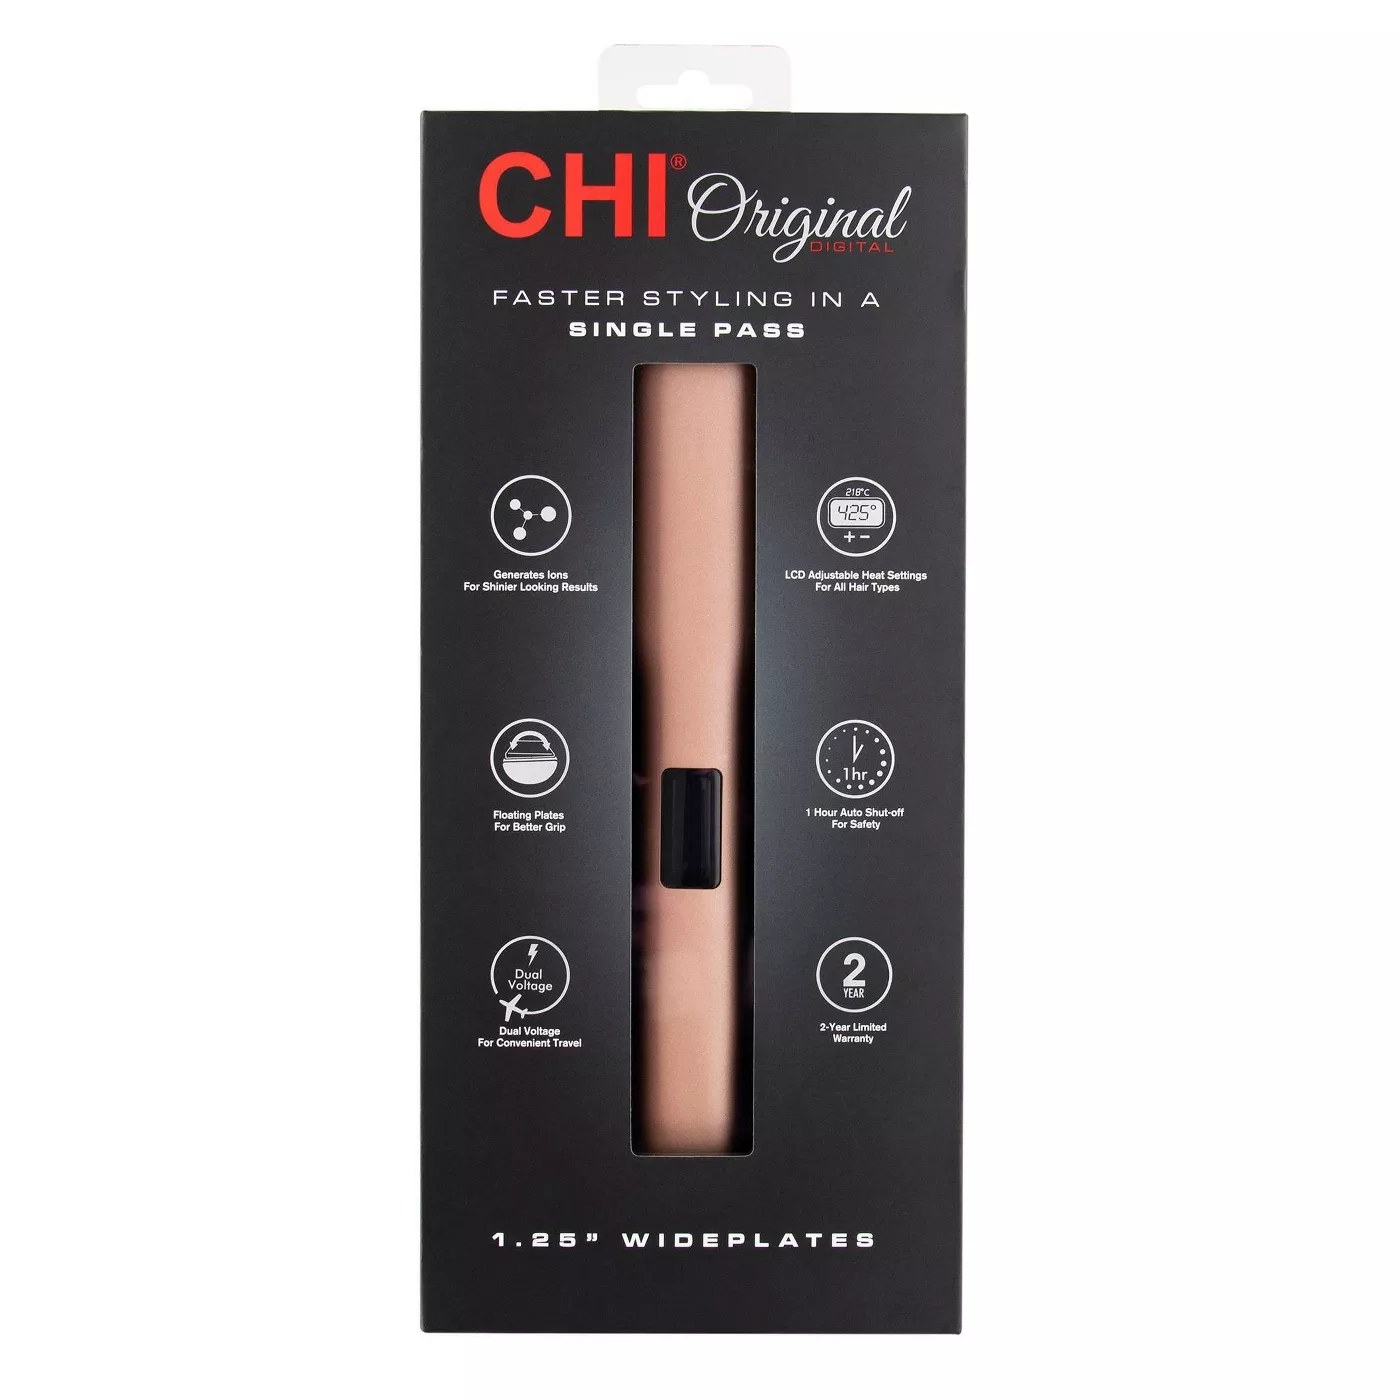 The Chi Original with 1.25-inch widveplates that style hair faster in a single pass